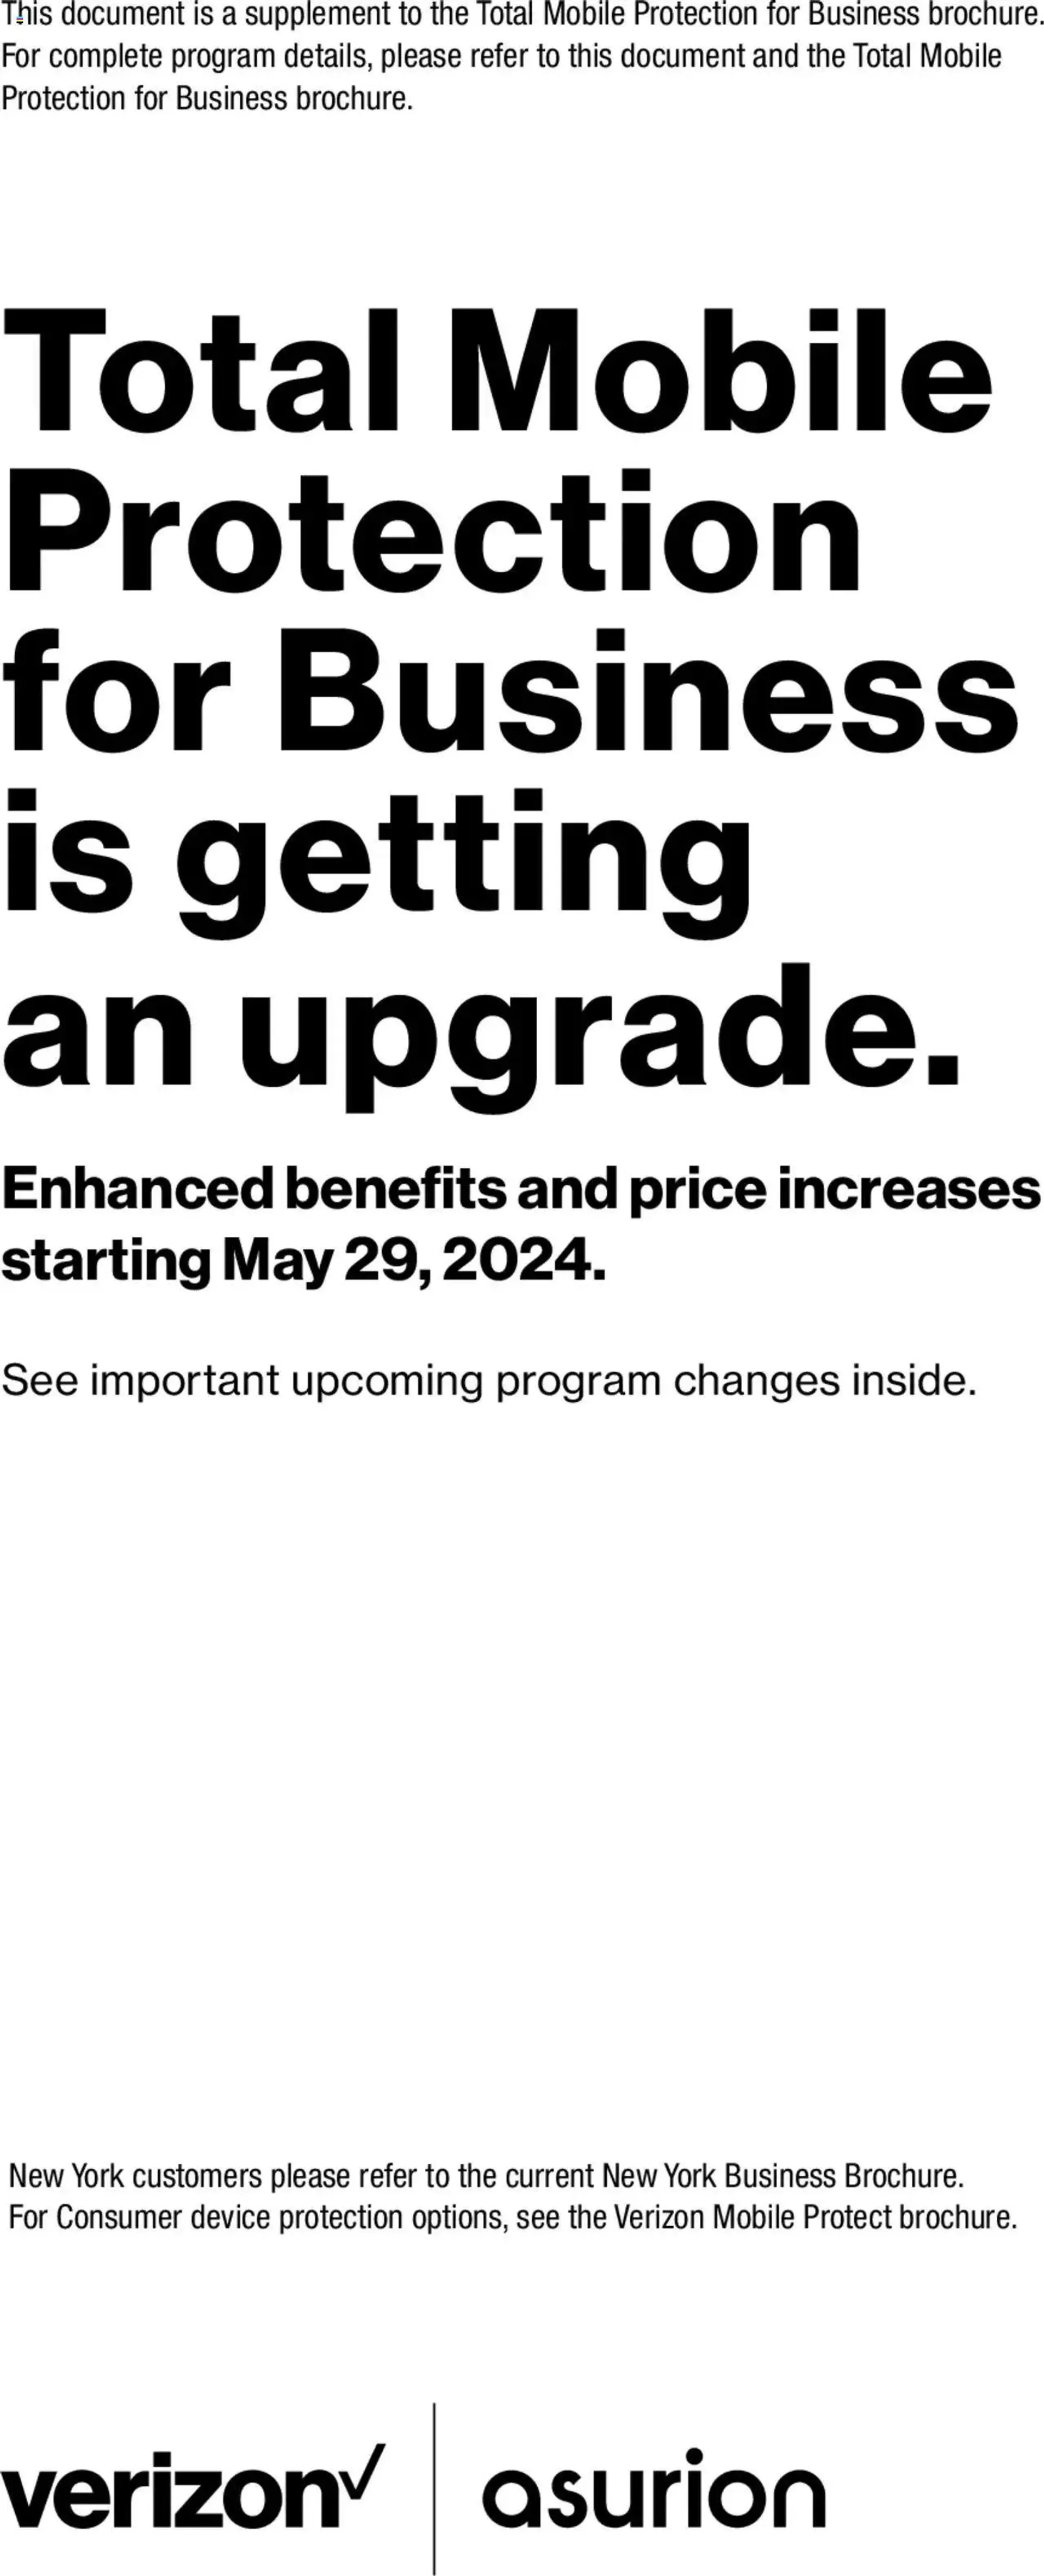 Weekly ad Verizon - Total Mobile Protection for Business is Getting an Upgrade from February 15 to March 5 2024 - Page 1